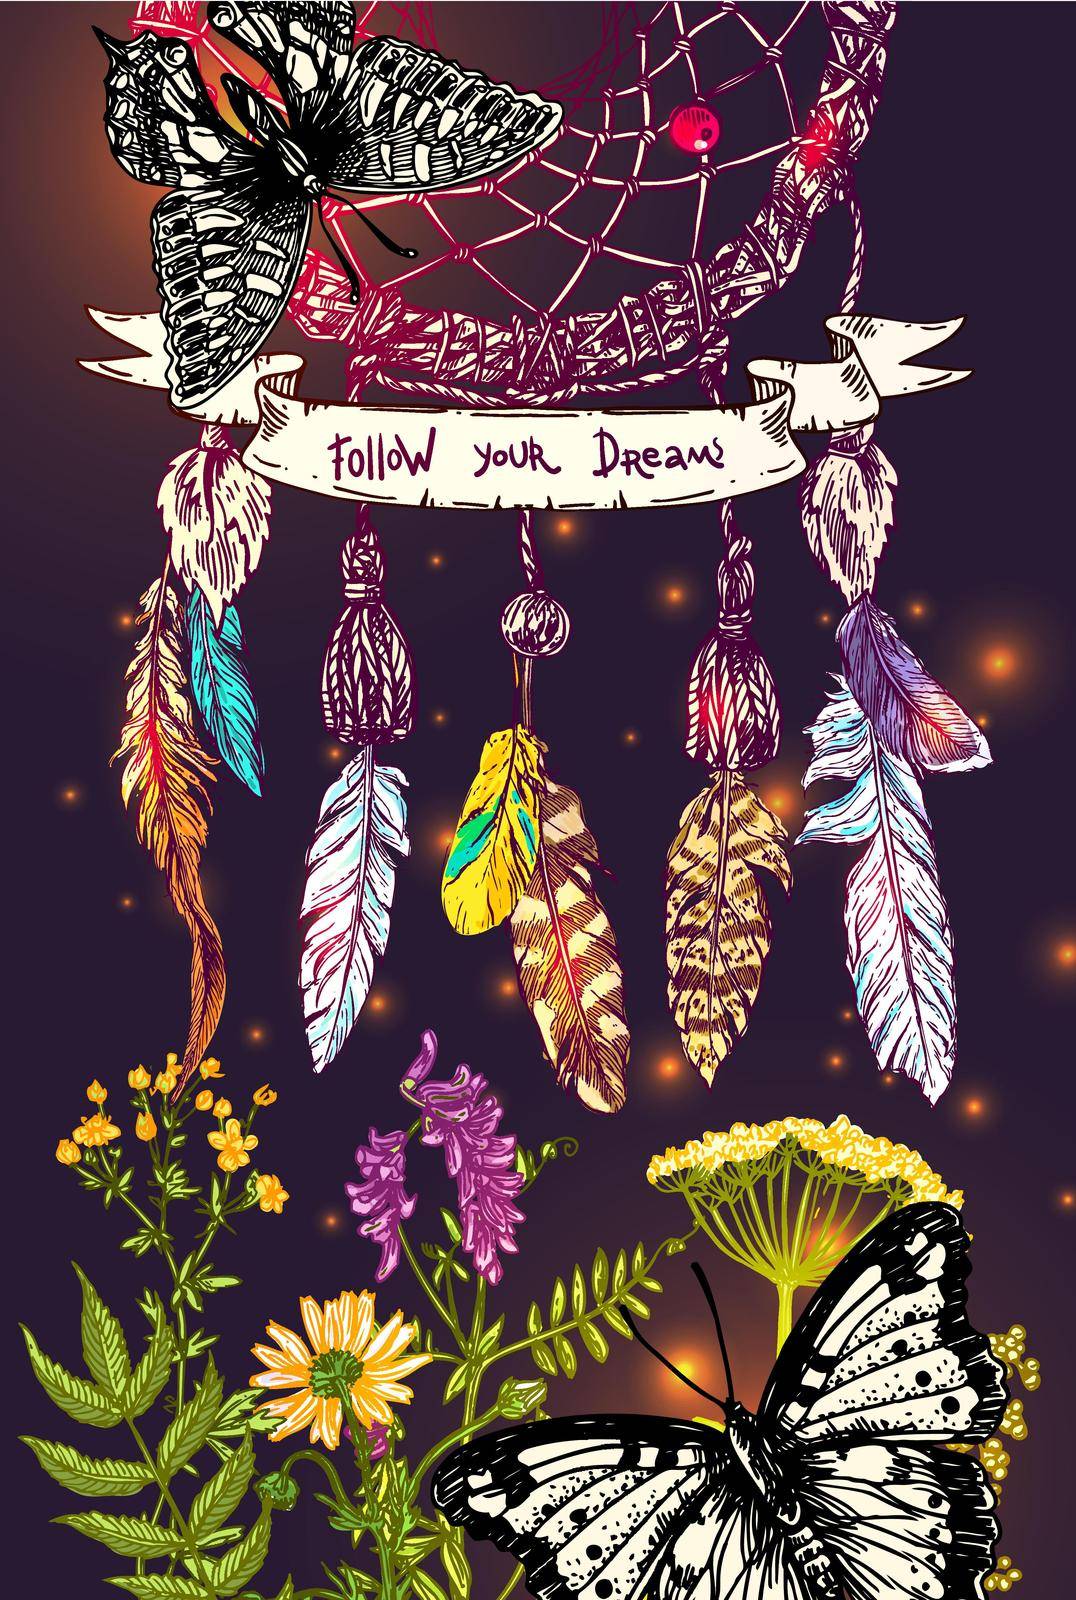 Beautiful hand drawn vector illustration sketching of dreamcatcher adn wildflowers. Boho style drawing. Use for postcards, print for t-shirts, posters, wedding invitation.